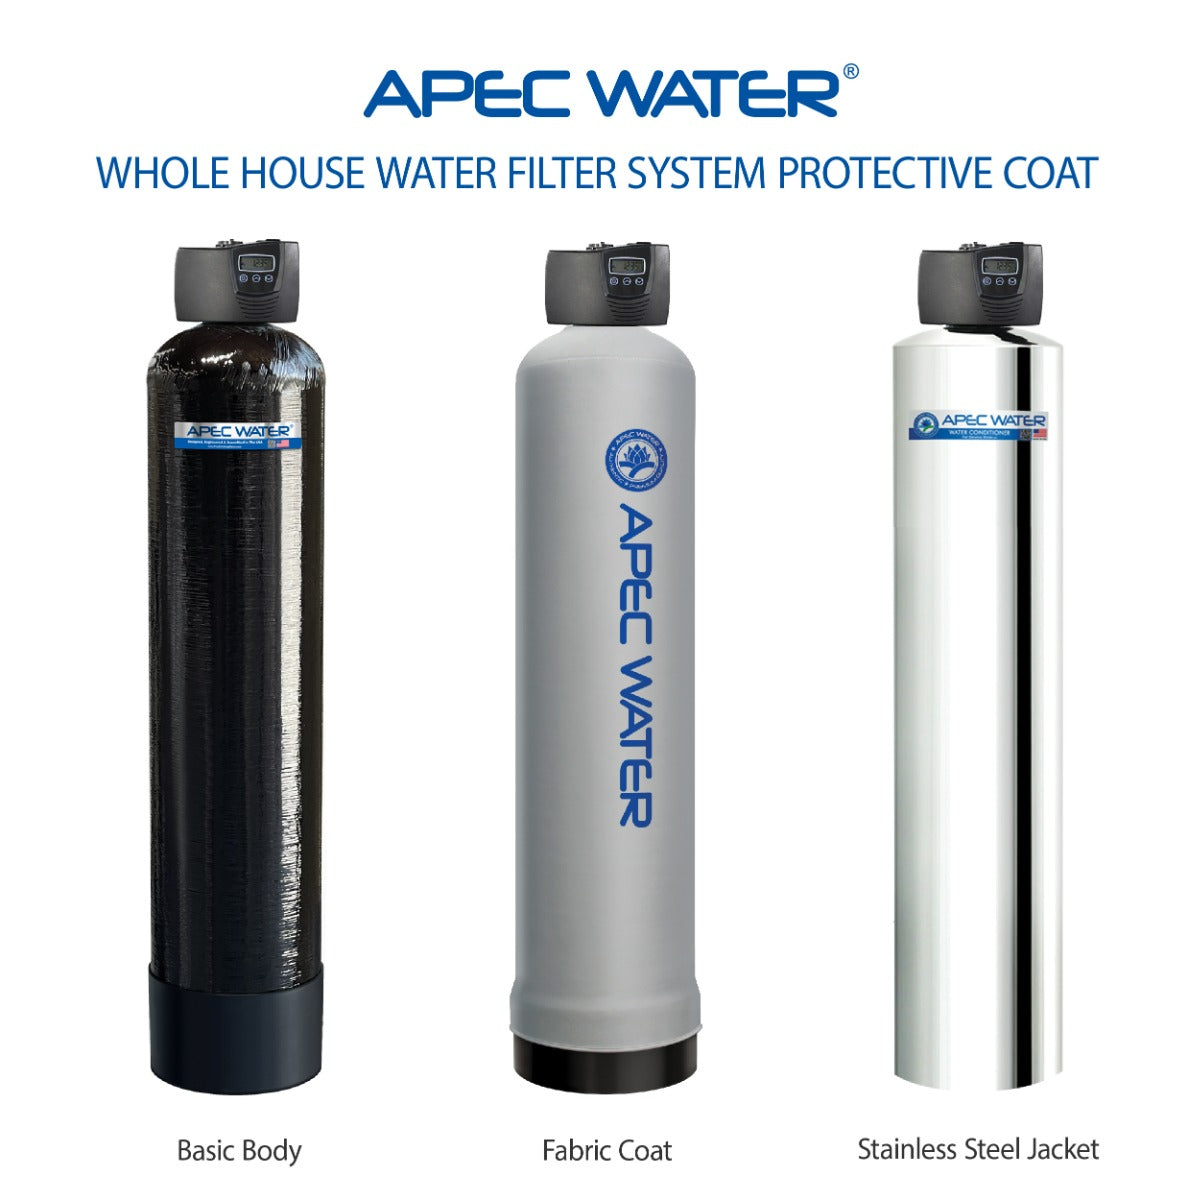 IRON HYDRO - 10 IRON WATER FILTER, HYDROGEN SULFIDE & MANGANESE REMOVAL SYSTEM